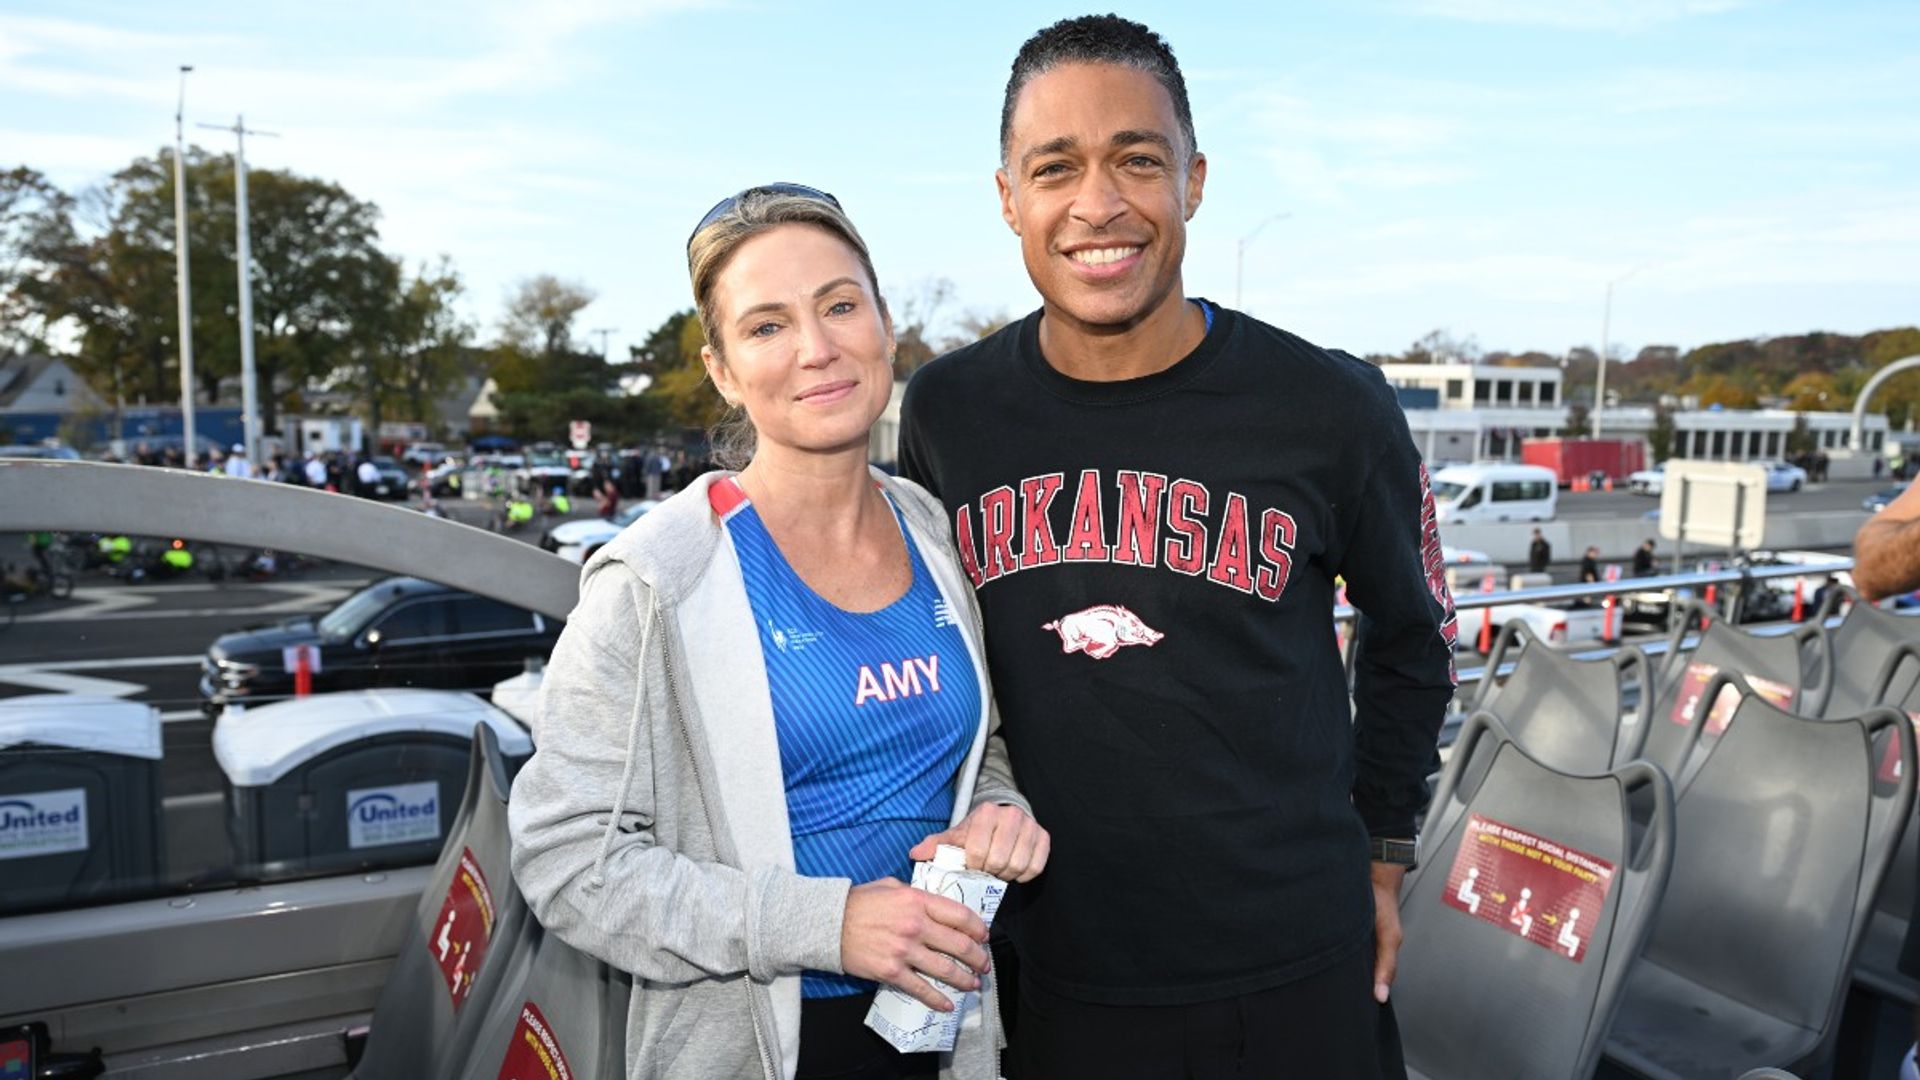 What will GMA3's Amy Robach and T.J. Holmes do next?